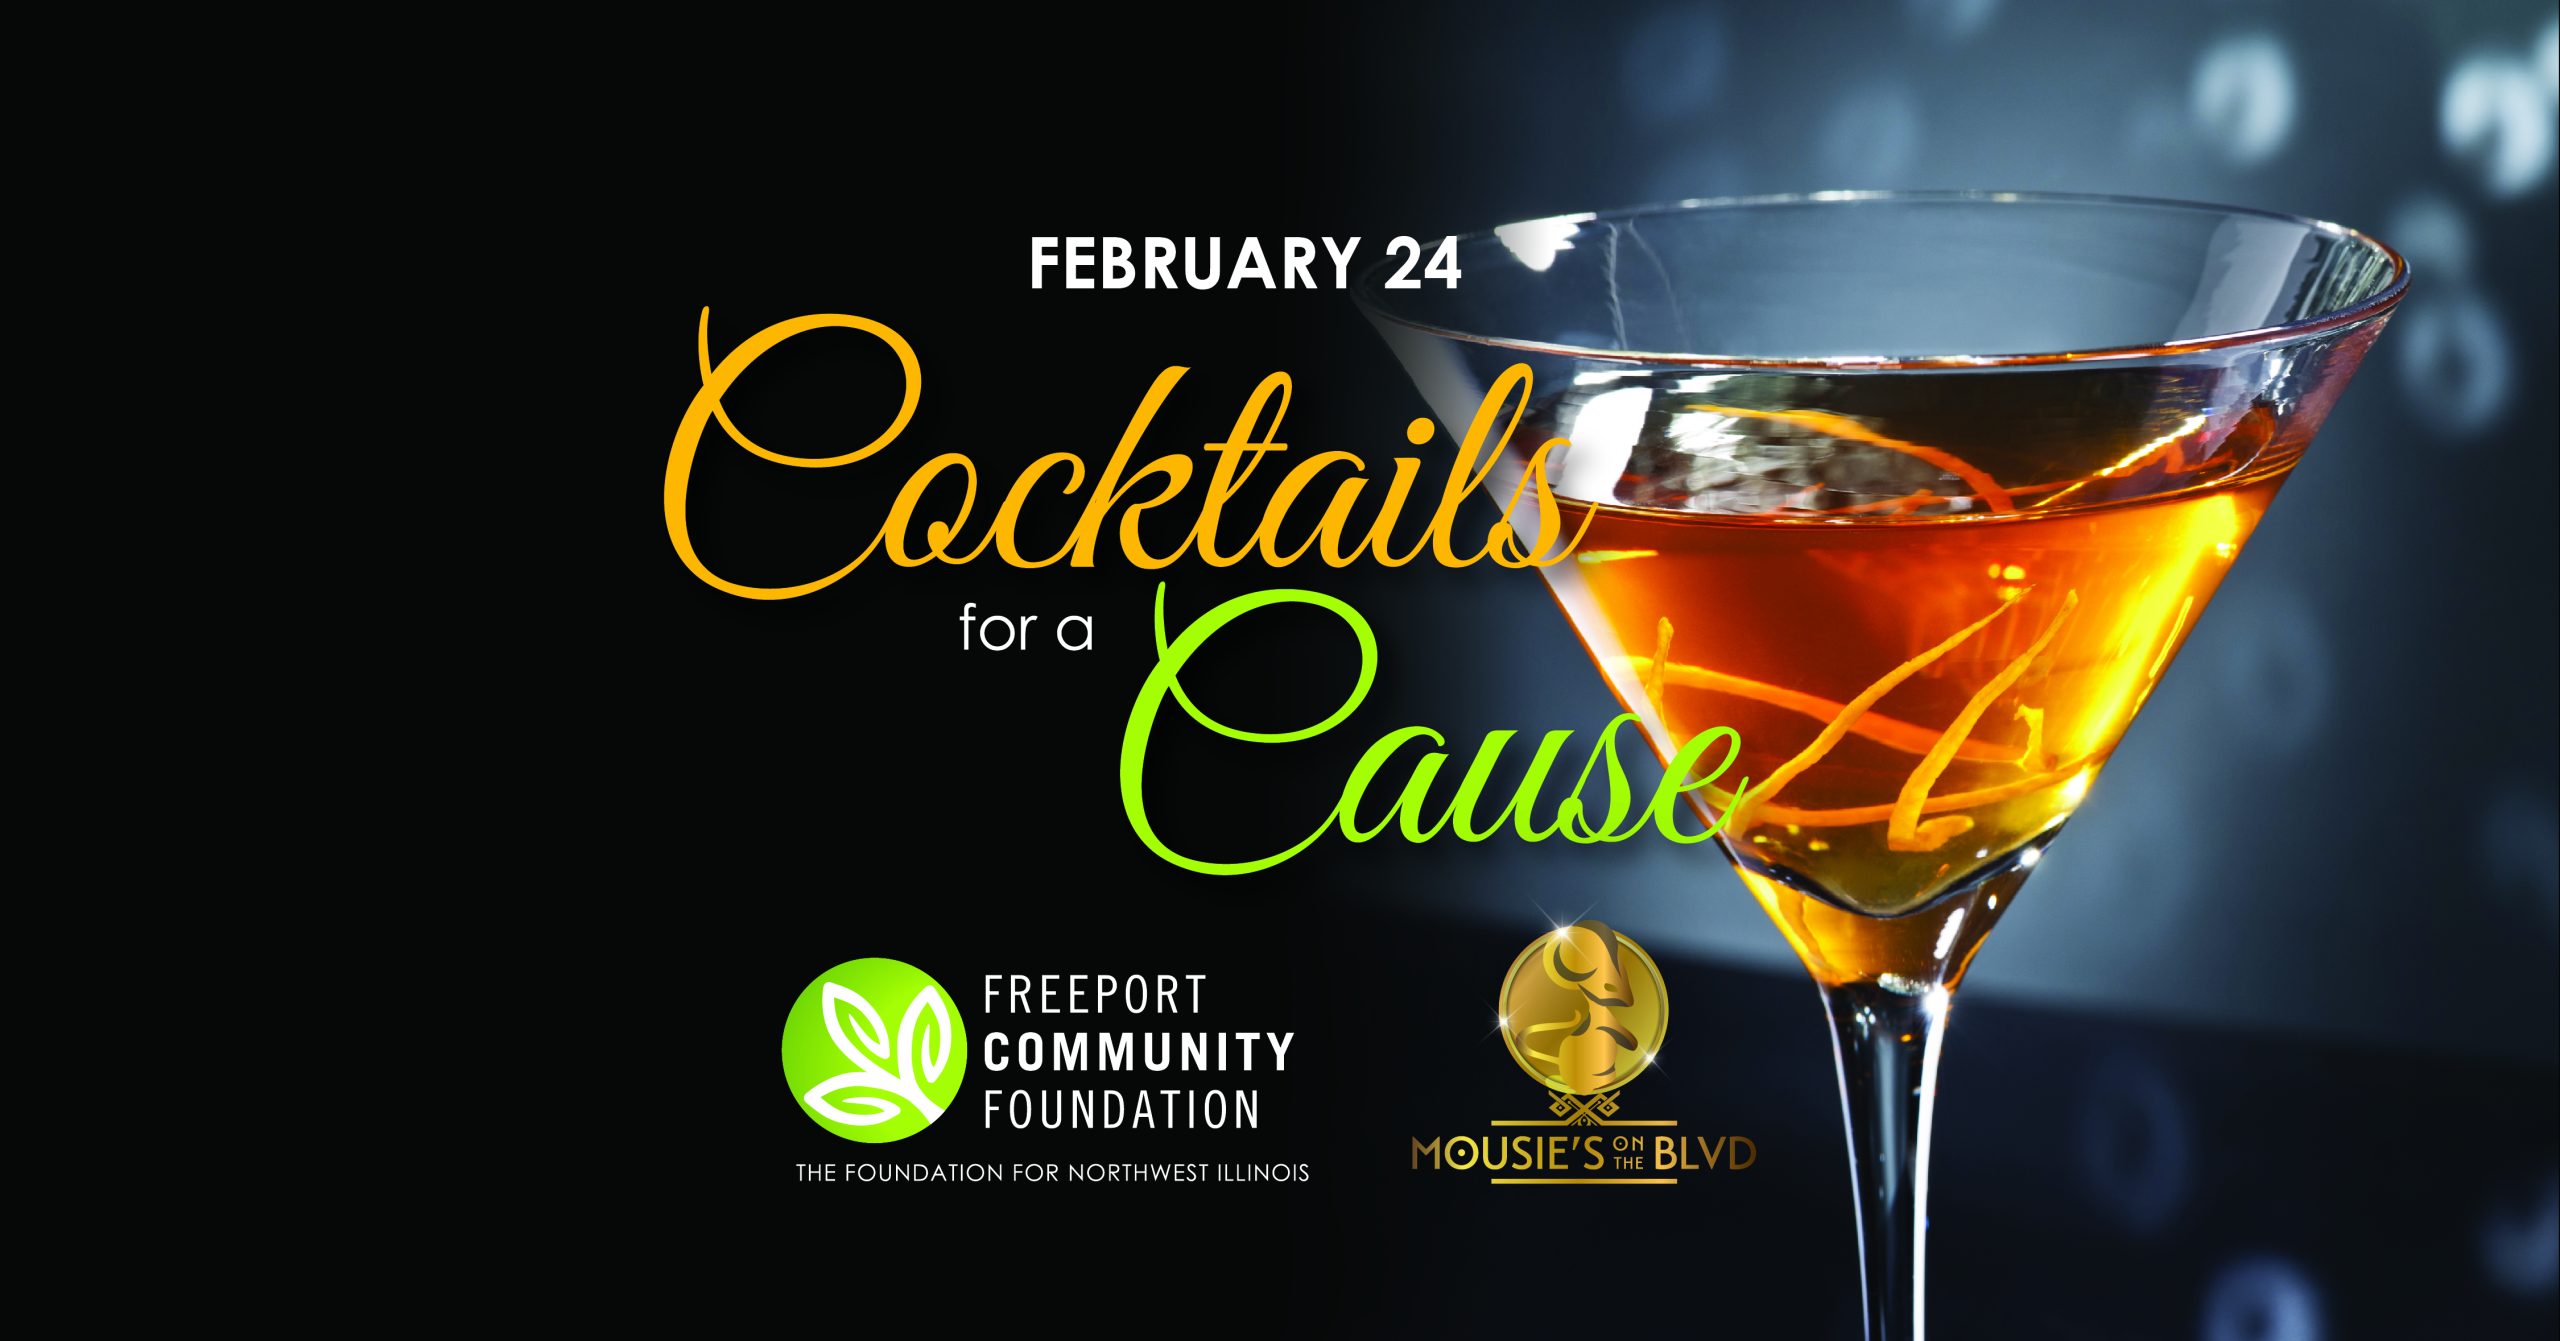 Cocktails for a Cause: February 24 at The Freeport Club